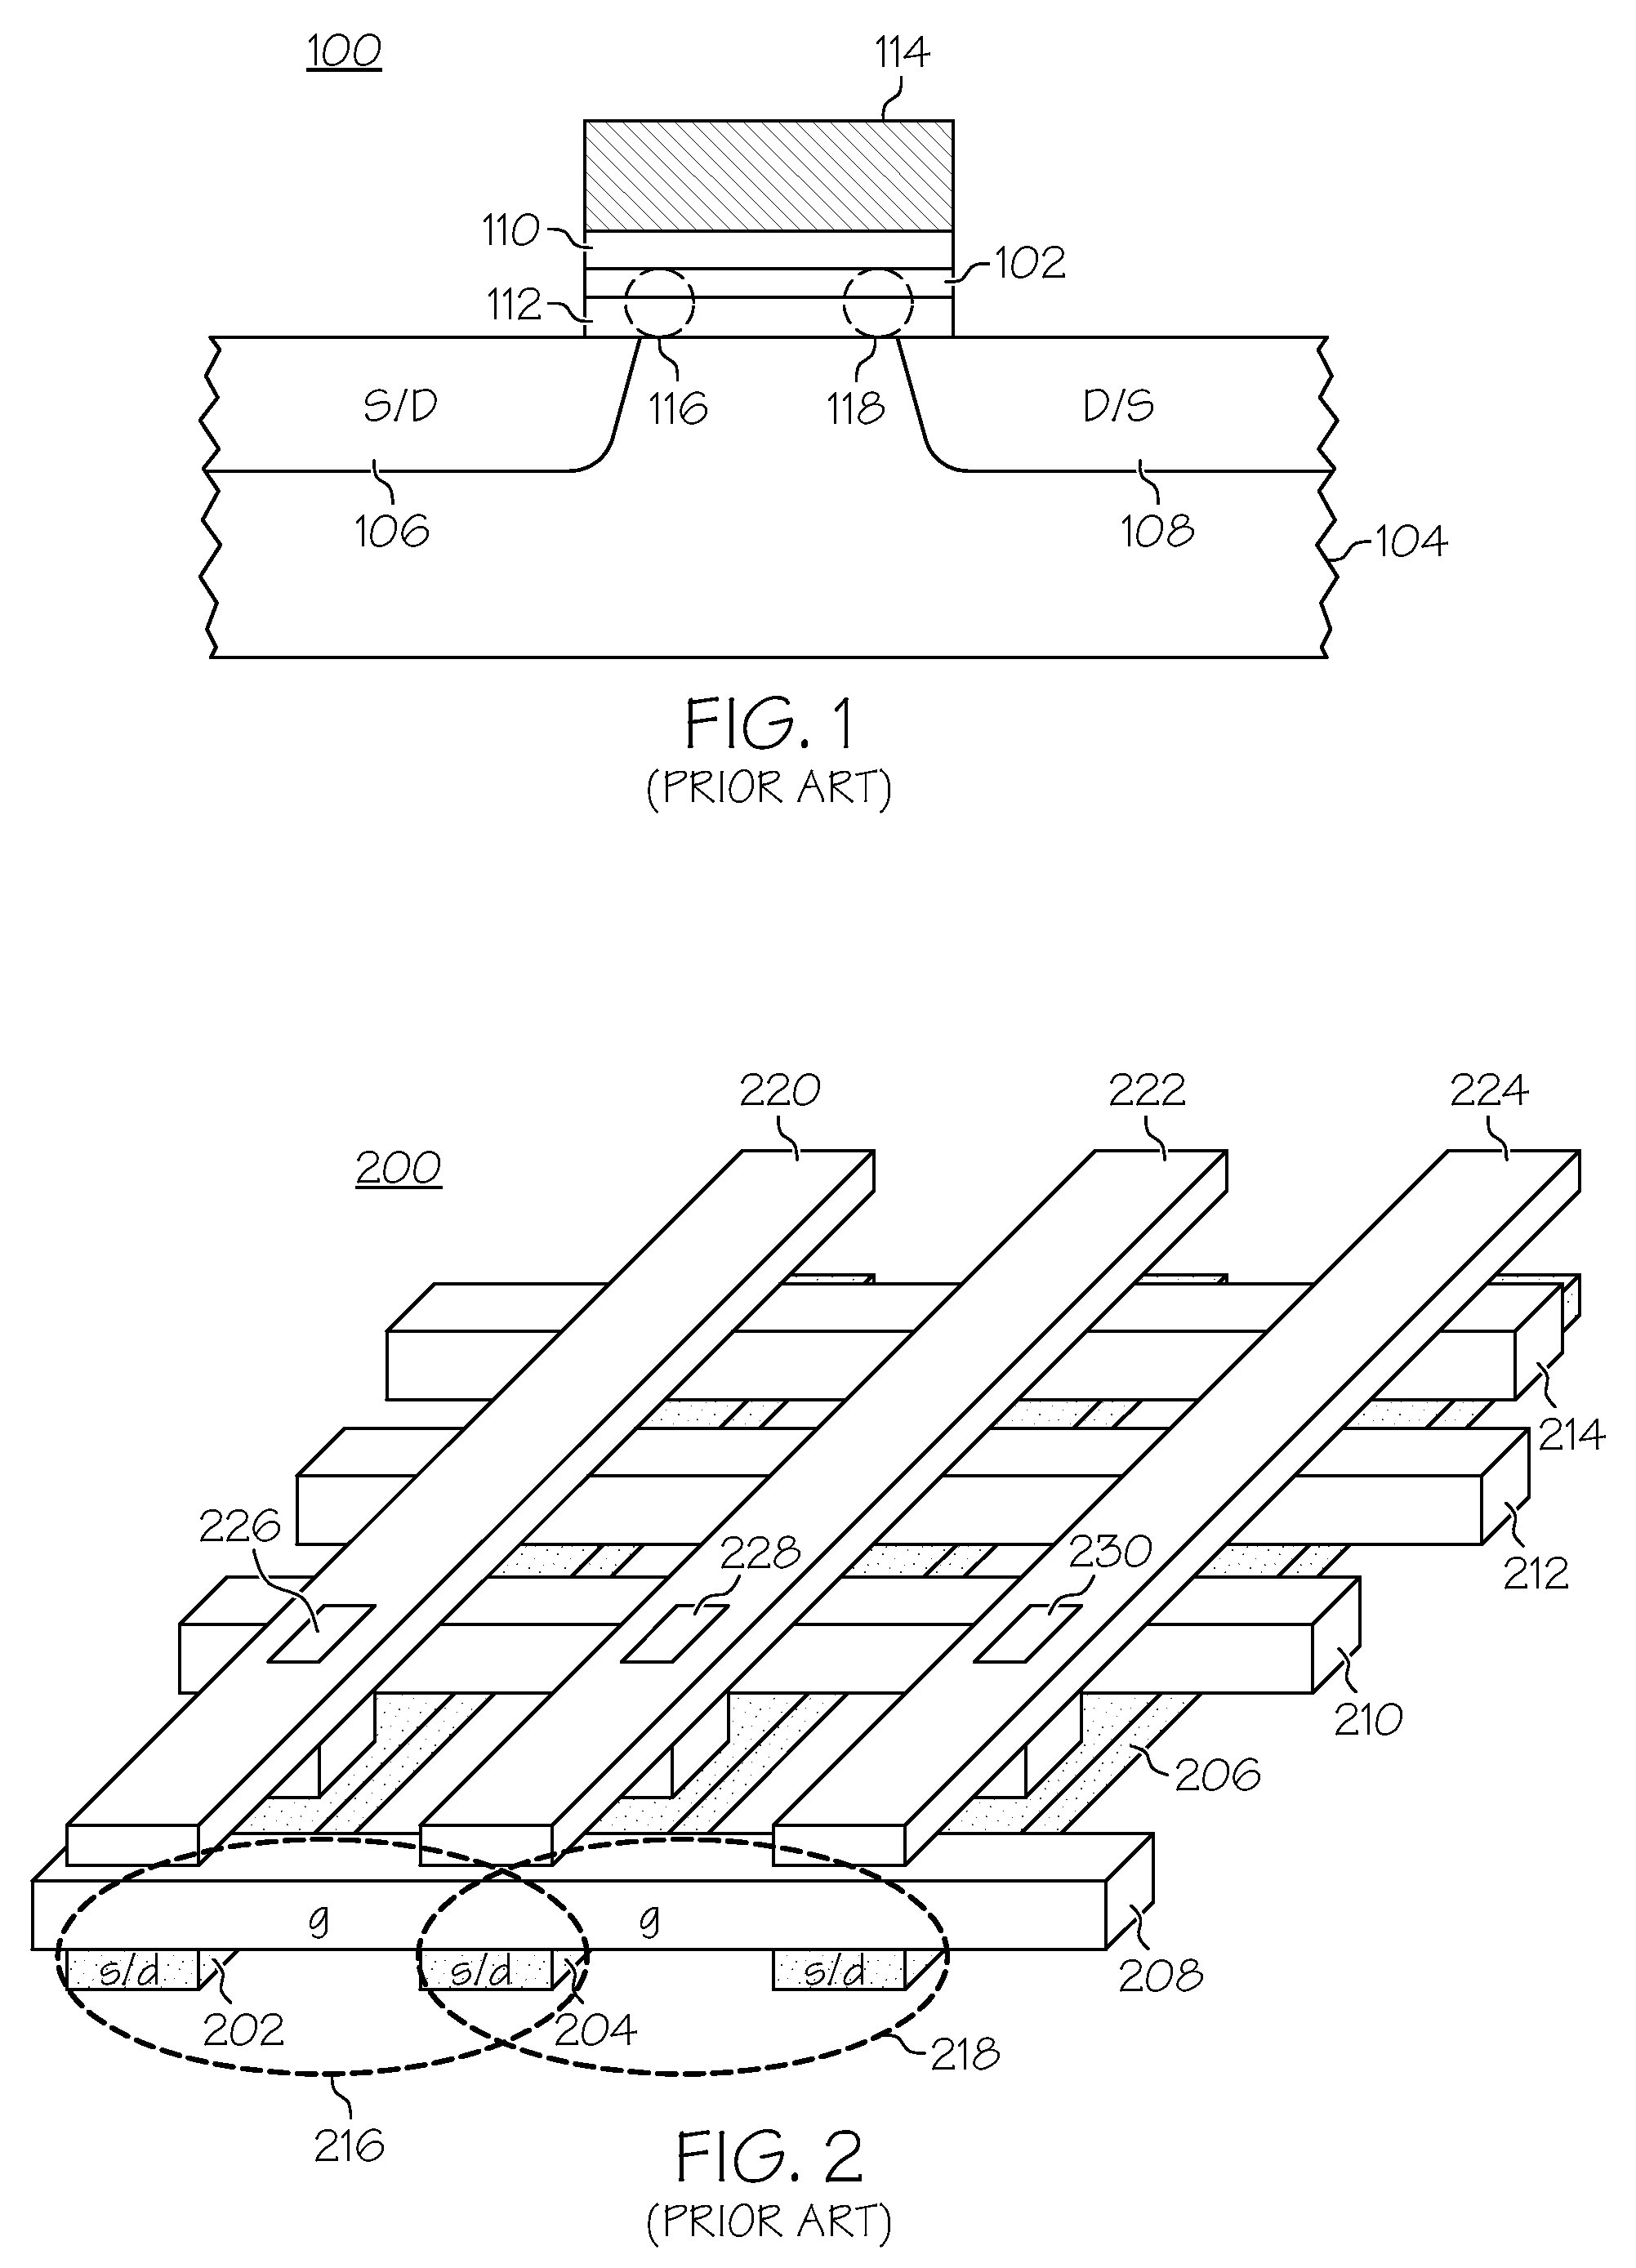 Negative wordline bias for reduction of leakage current during flash memory operation